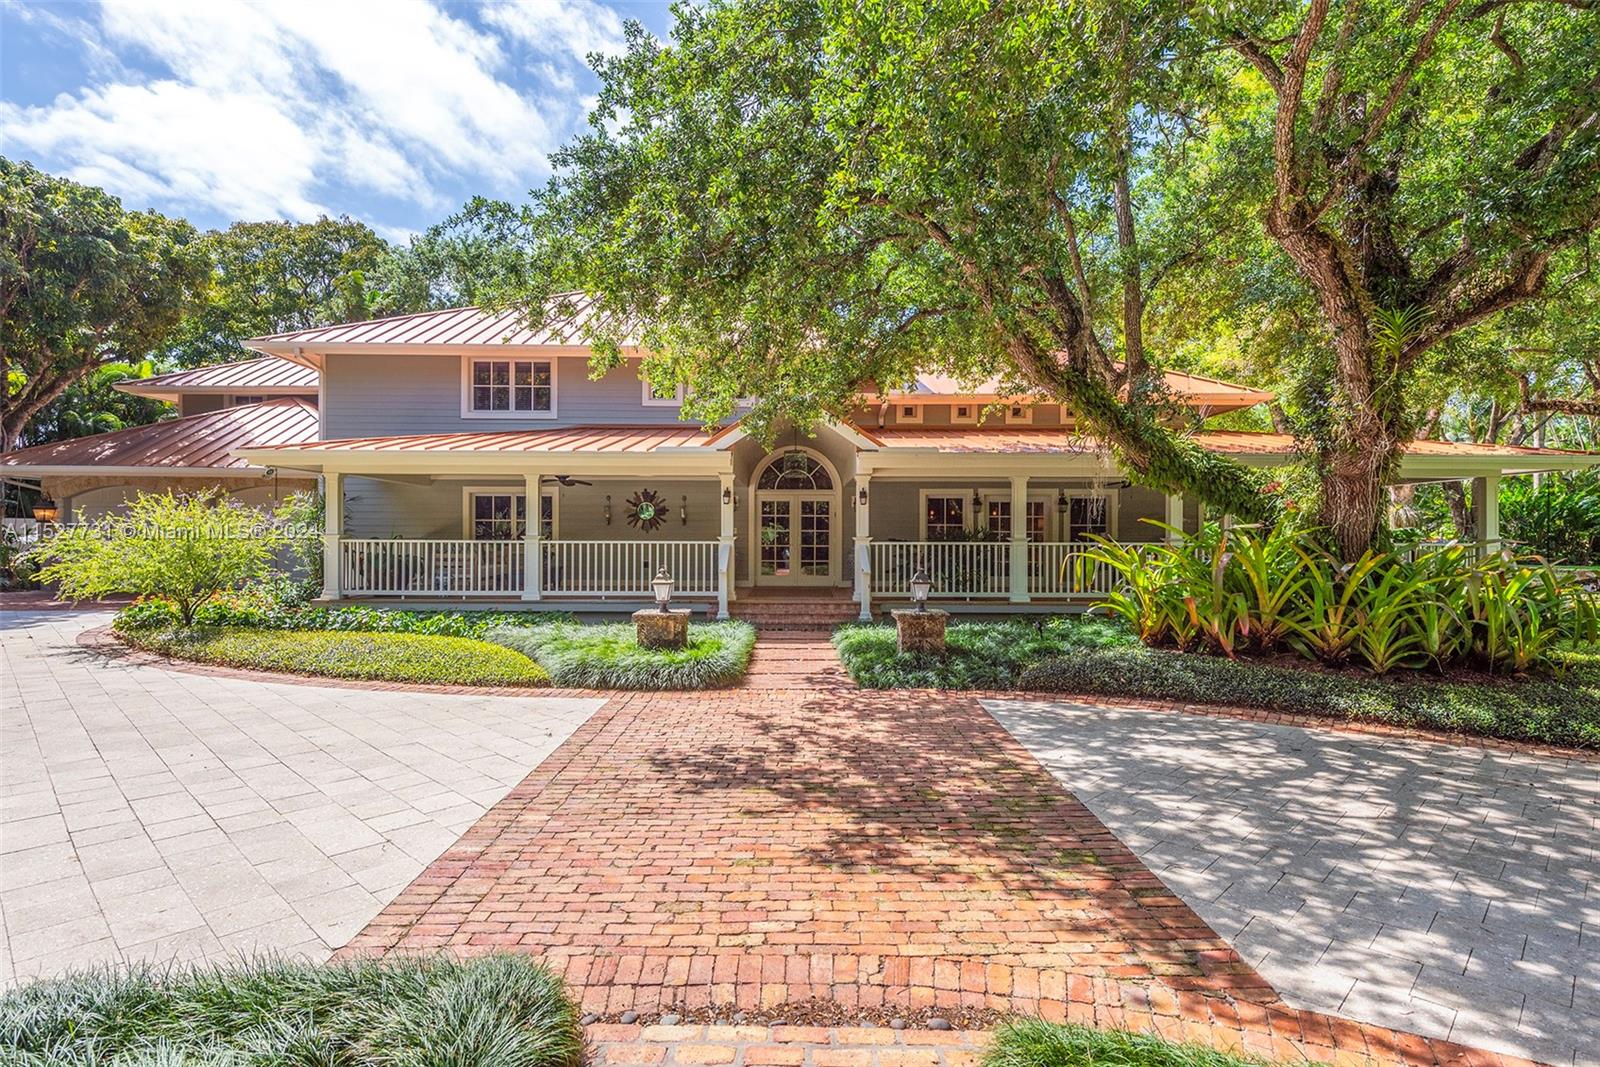 Located in the guard-gated Banyan Lakes neighborhood, this 2003 custom Old Florida estate-style home w/ wraparound porches spans 8,765 SF & is the epitome of sophisticated living.  Situated on a 50,000+ sf lot that is nothing short of magical w/ live oaks, terraced lawn, & lush landscaping around the lagoon-style pool & patio. The 6 BR, 5.2 BA home w/ floorplan that calls for entertaining features a formal liv rm that opens to a zen garden & family rm w/ custom built-ins & fireplace. The bespoke kitchen incl Caesarstone counters, Wolfe & Subzero appliances, banquette & butlers pantry.  The primary ste has  large BR, gym, 2 walk-ins, & spa-like BA. There are 4 add’l BRs upstairs + office. White oak floors, impact glass, 2014 metal roof, generator, 2-car gar are some of the special features.